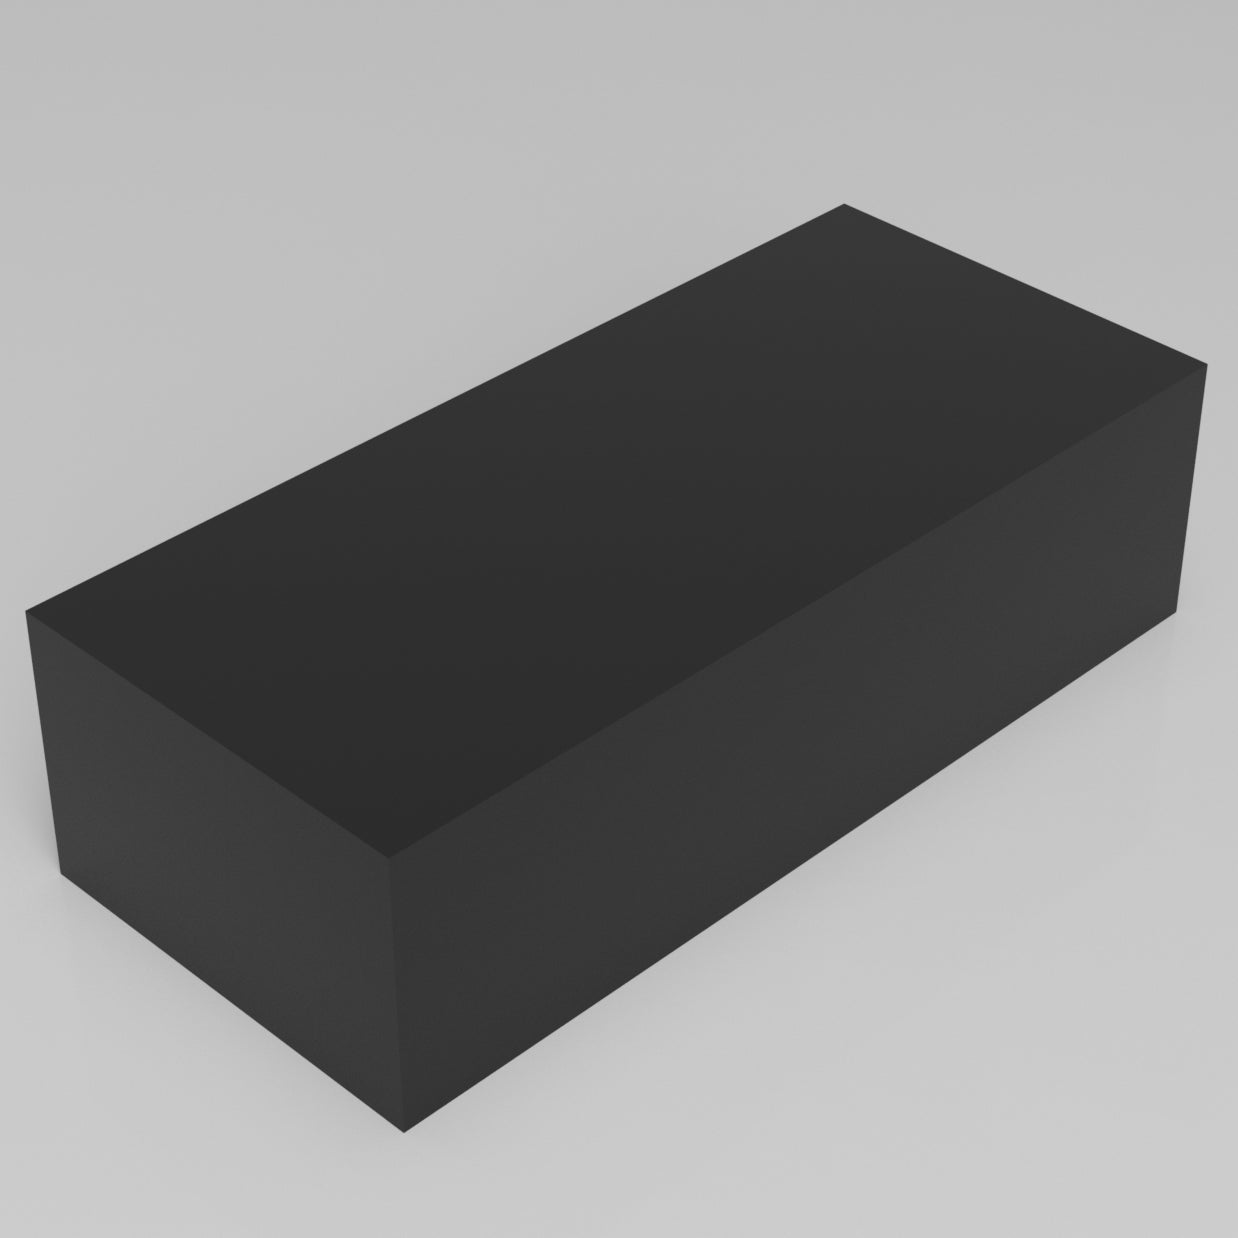 Machinable Wax Rectangular Block Front View 5 Inch by 8 Inch by 18 Inch